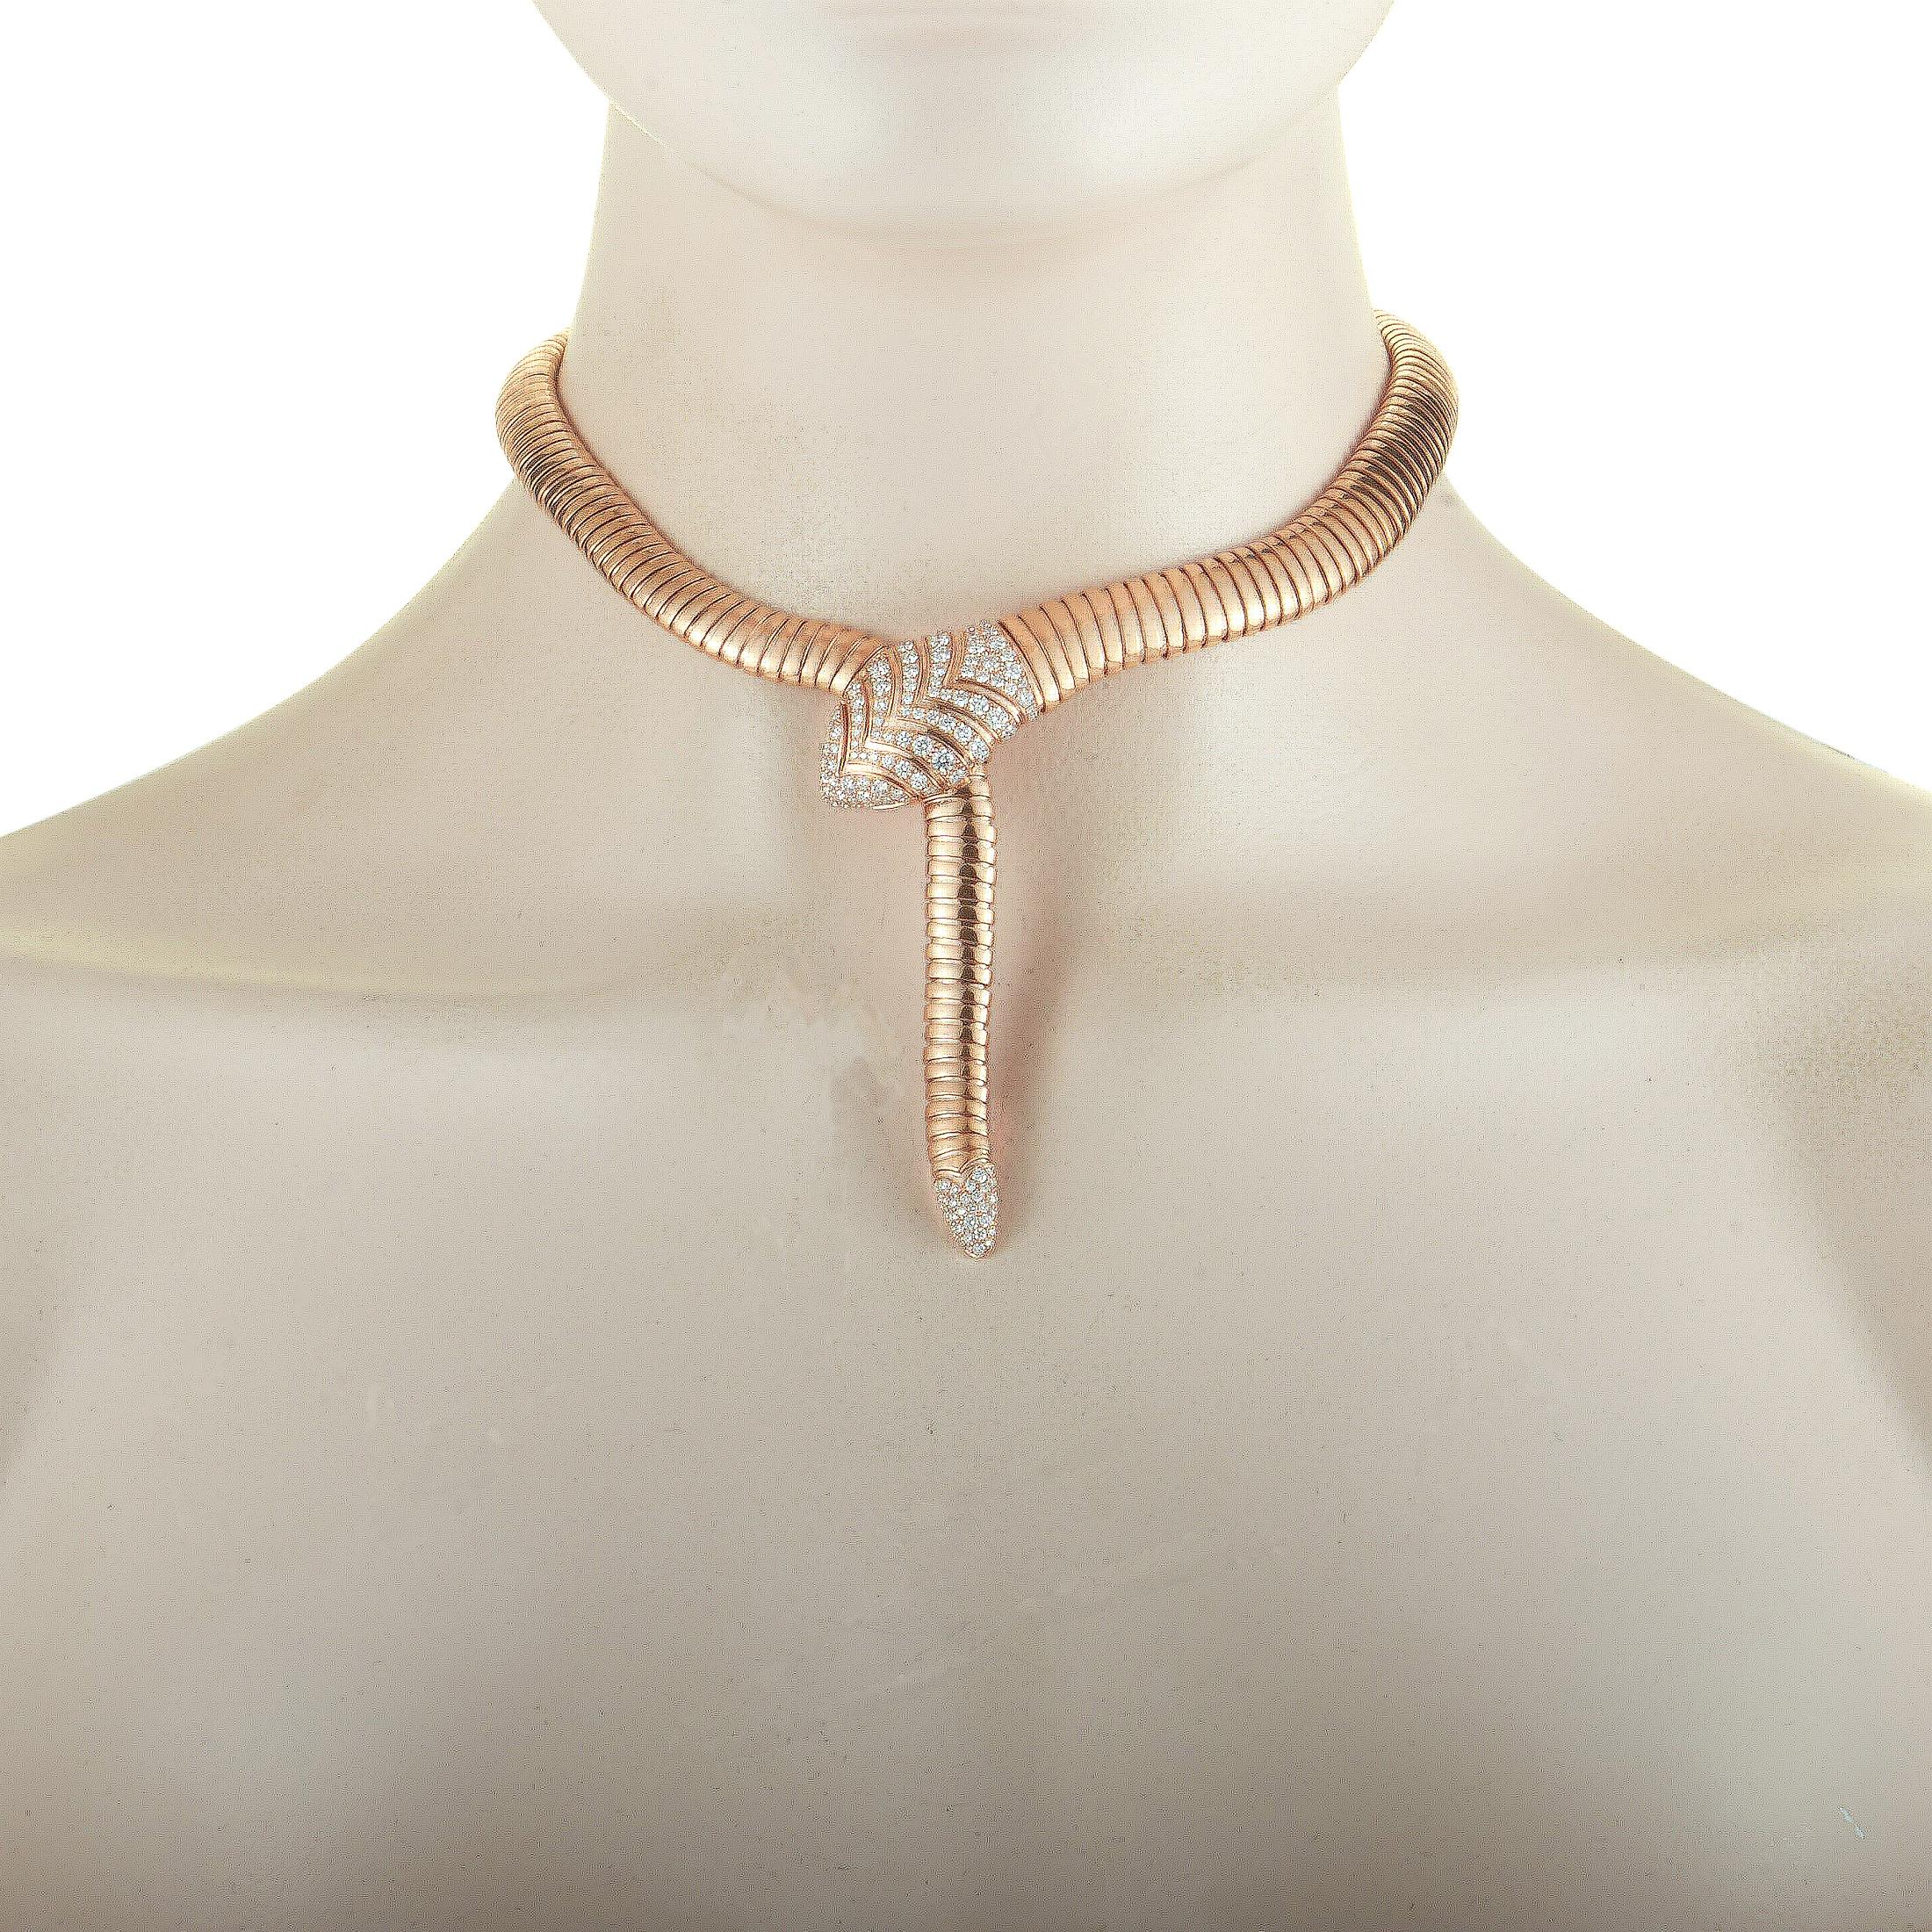 The Bvlgari “Serpenti” necklace is crafted from 18K rose gold and embellished with diamonds. The necklace weighs 135 grams and measures 18.50” in length.
 
 This jewelry piece is offered in brand new condition and includes the manufacturer’s box and